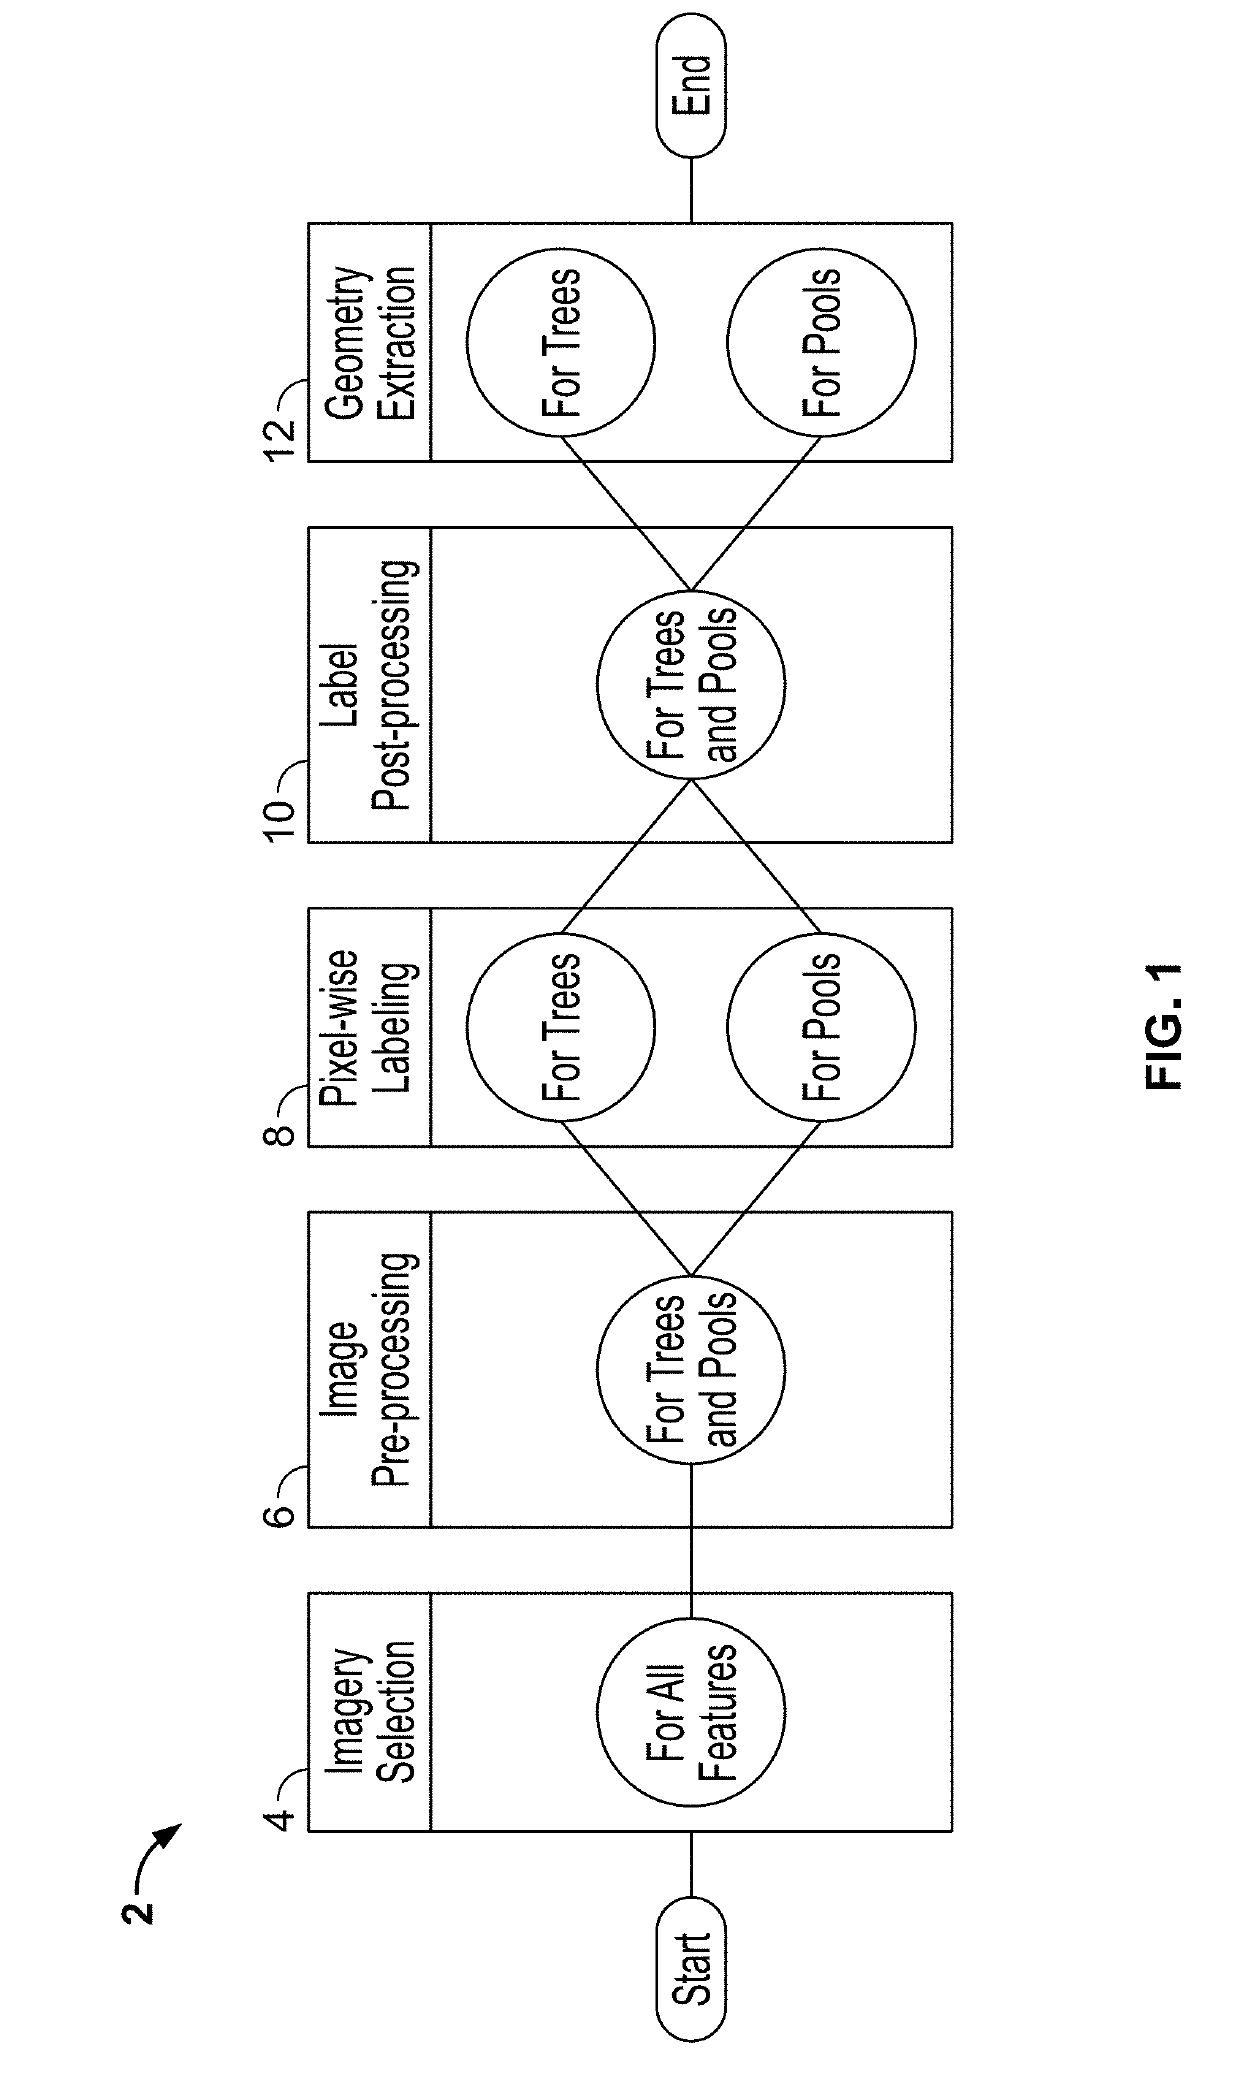 Computer Vision Systems and Methods for Geospatial Property Feature Detection and Extraction from Digital Images